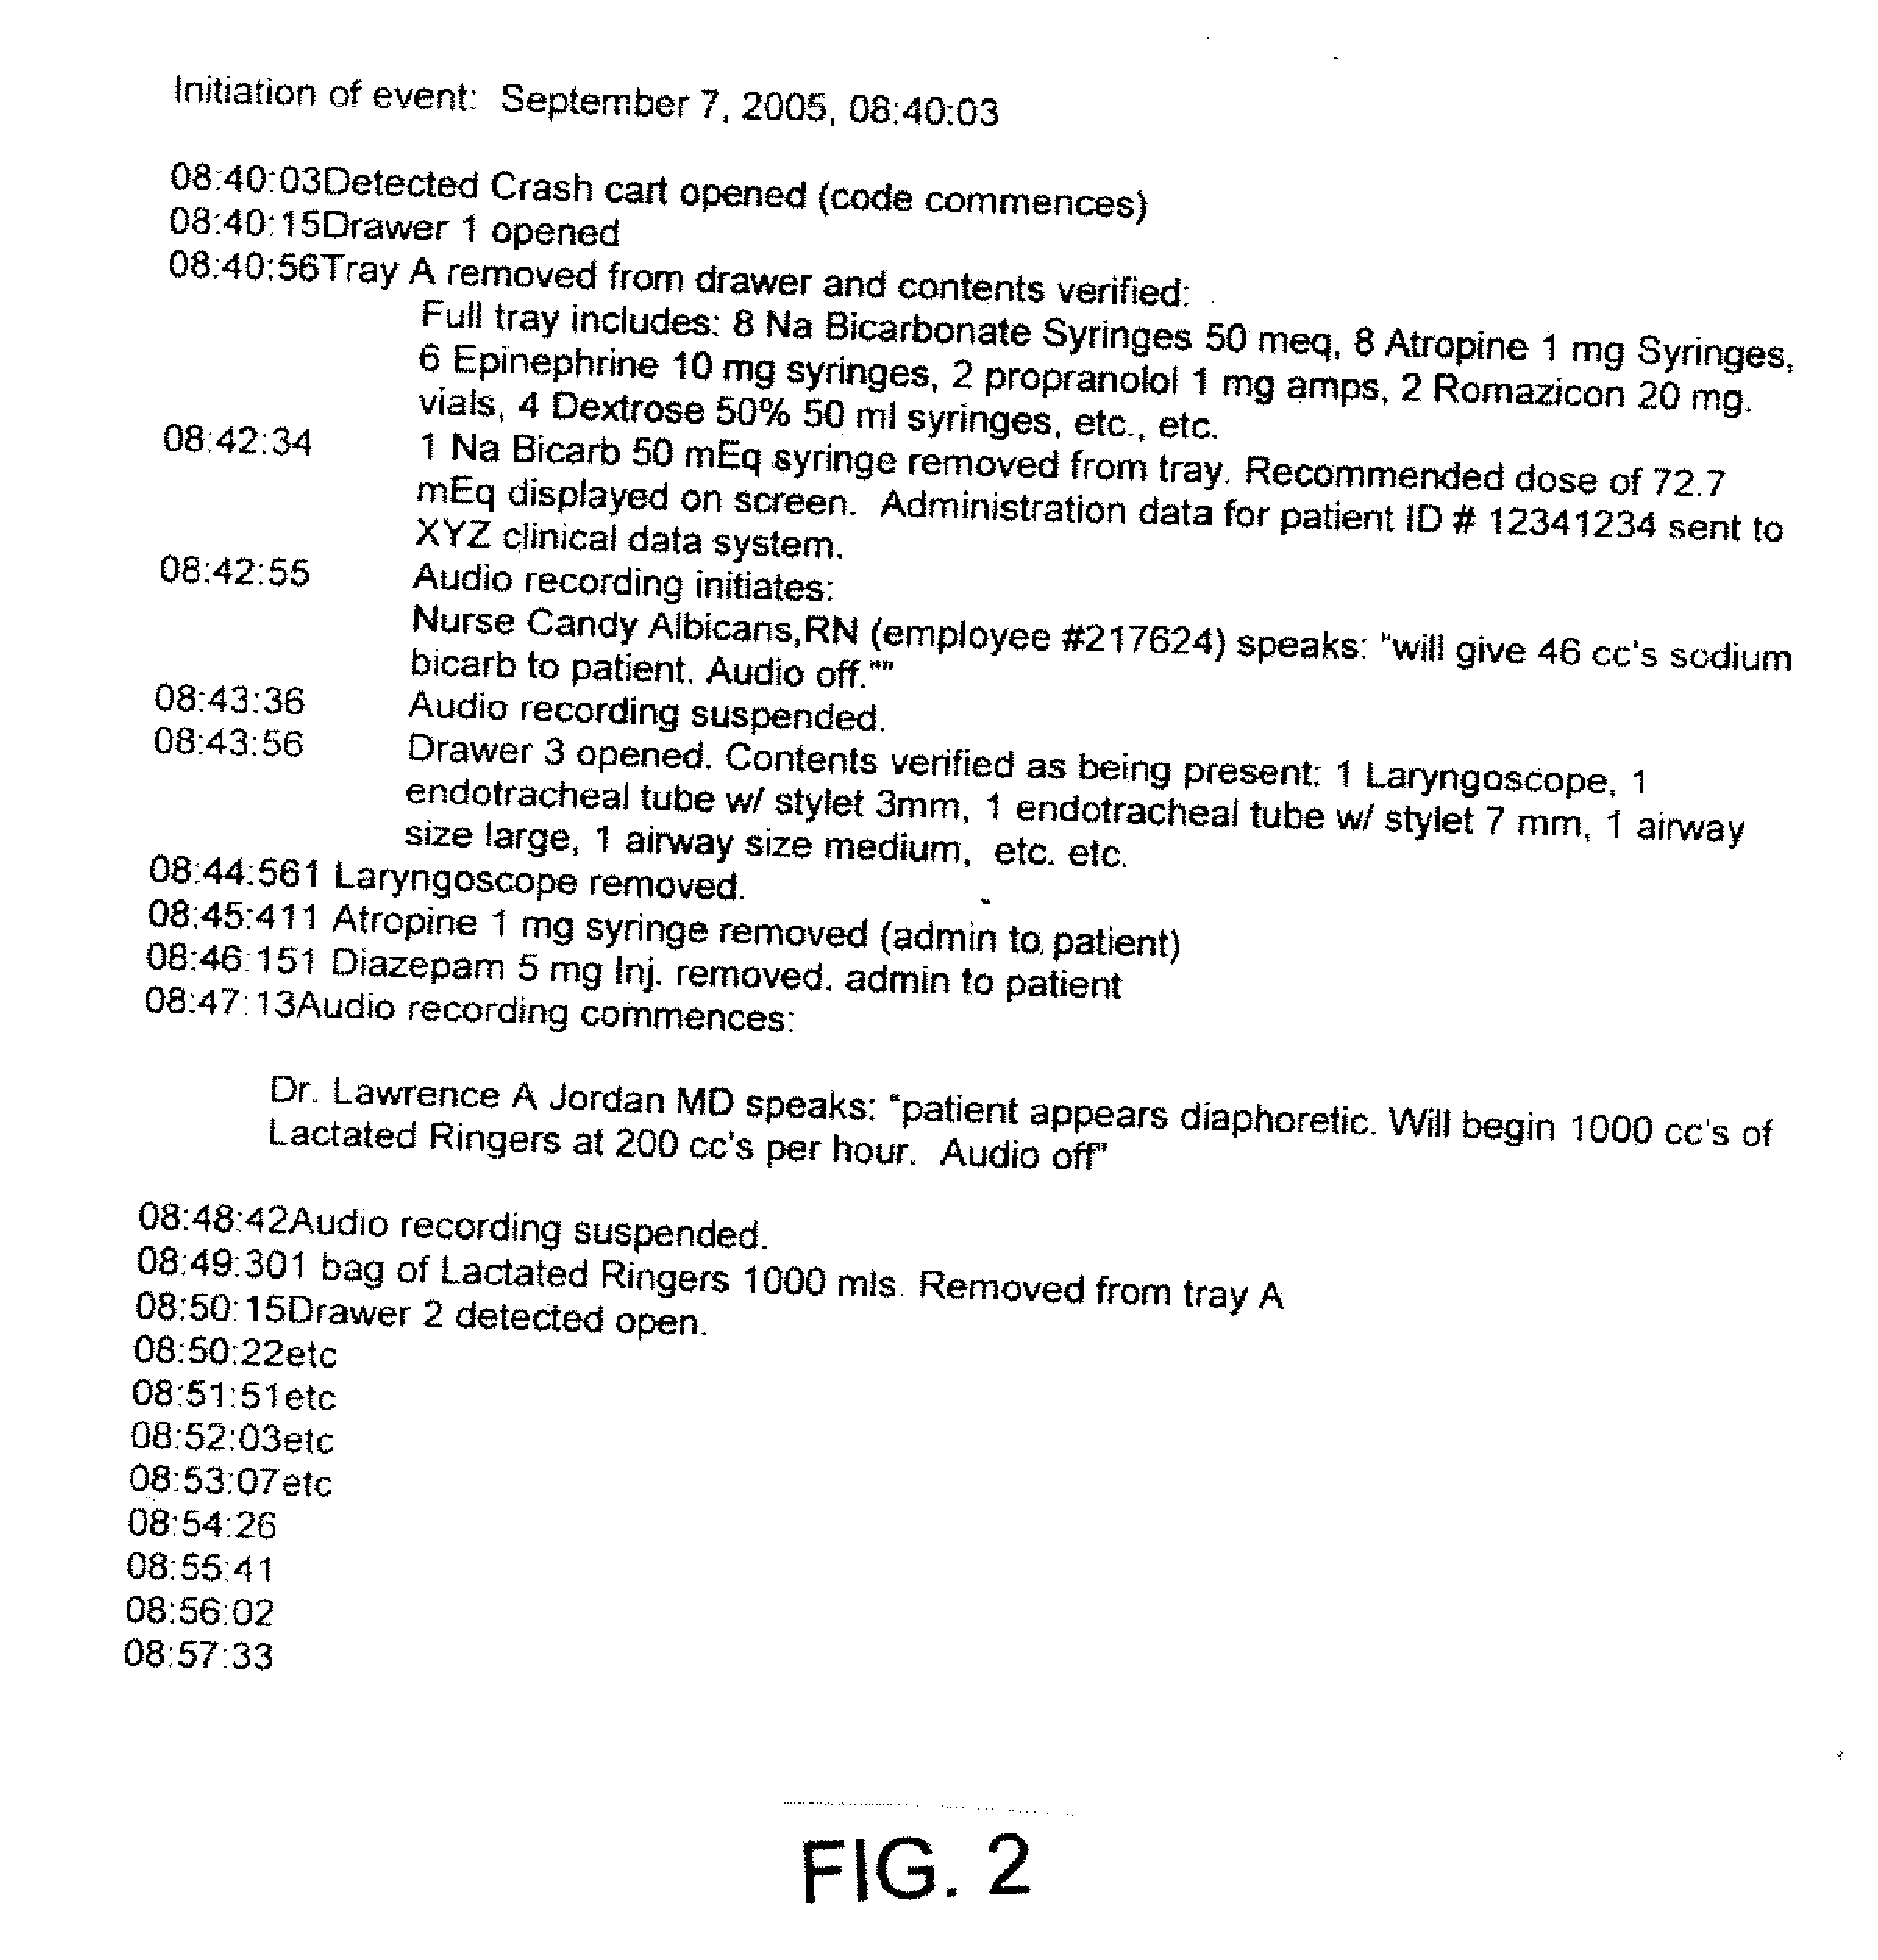 Vision Based Data Acquisition System and Method For Acquiring Medical and Other Information